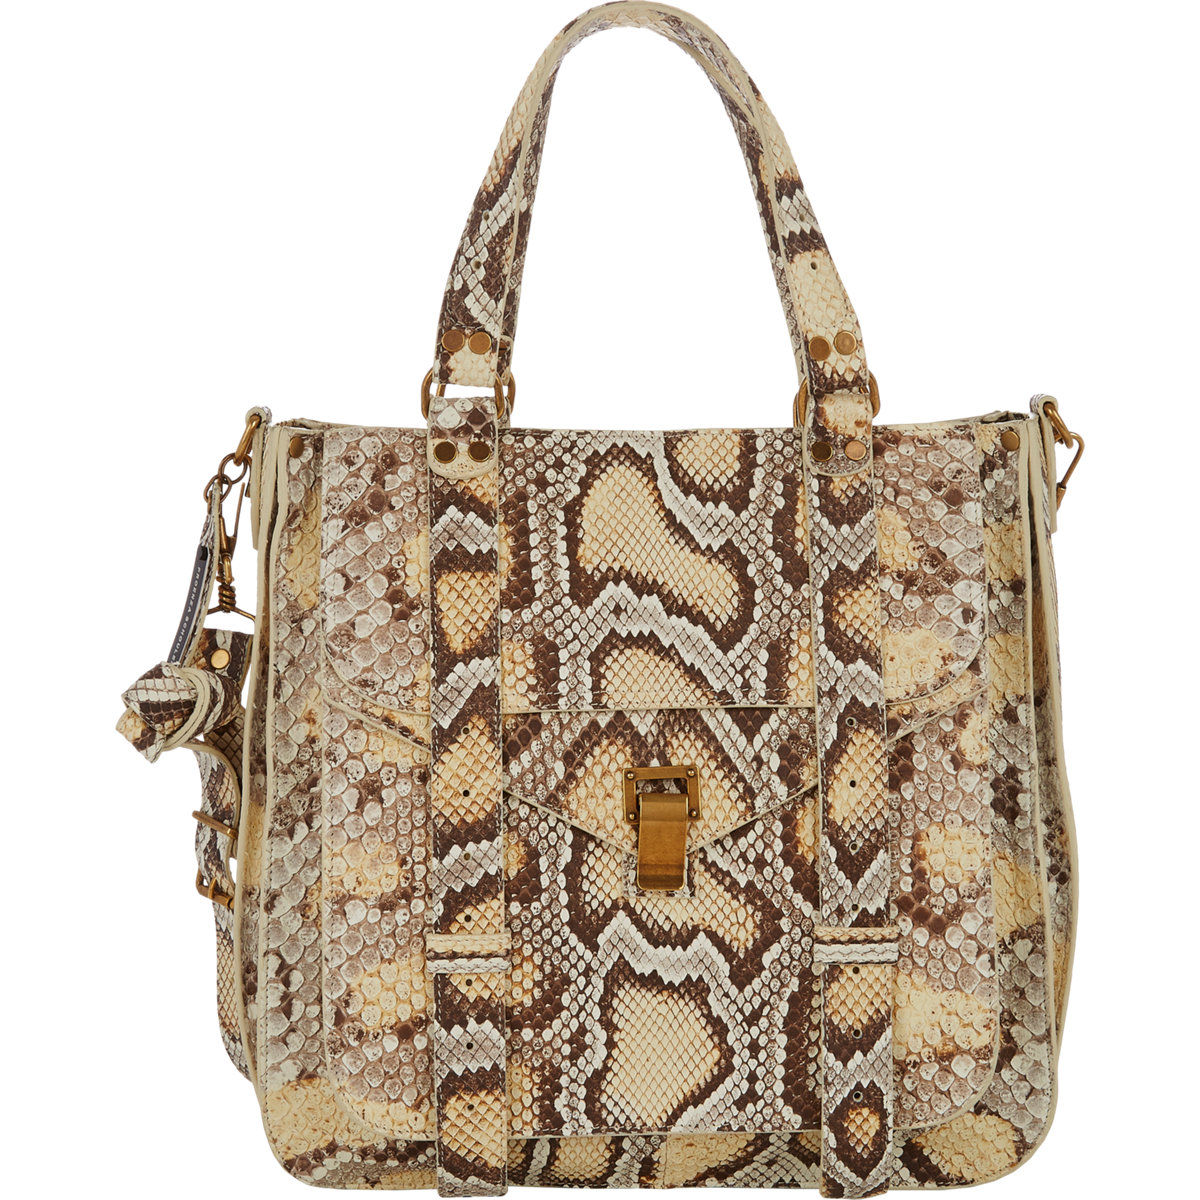 Proenza Schouler Beige/Brown/Ivory Python PS1 Tote Bag